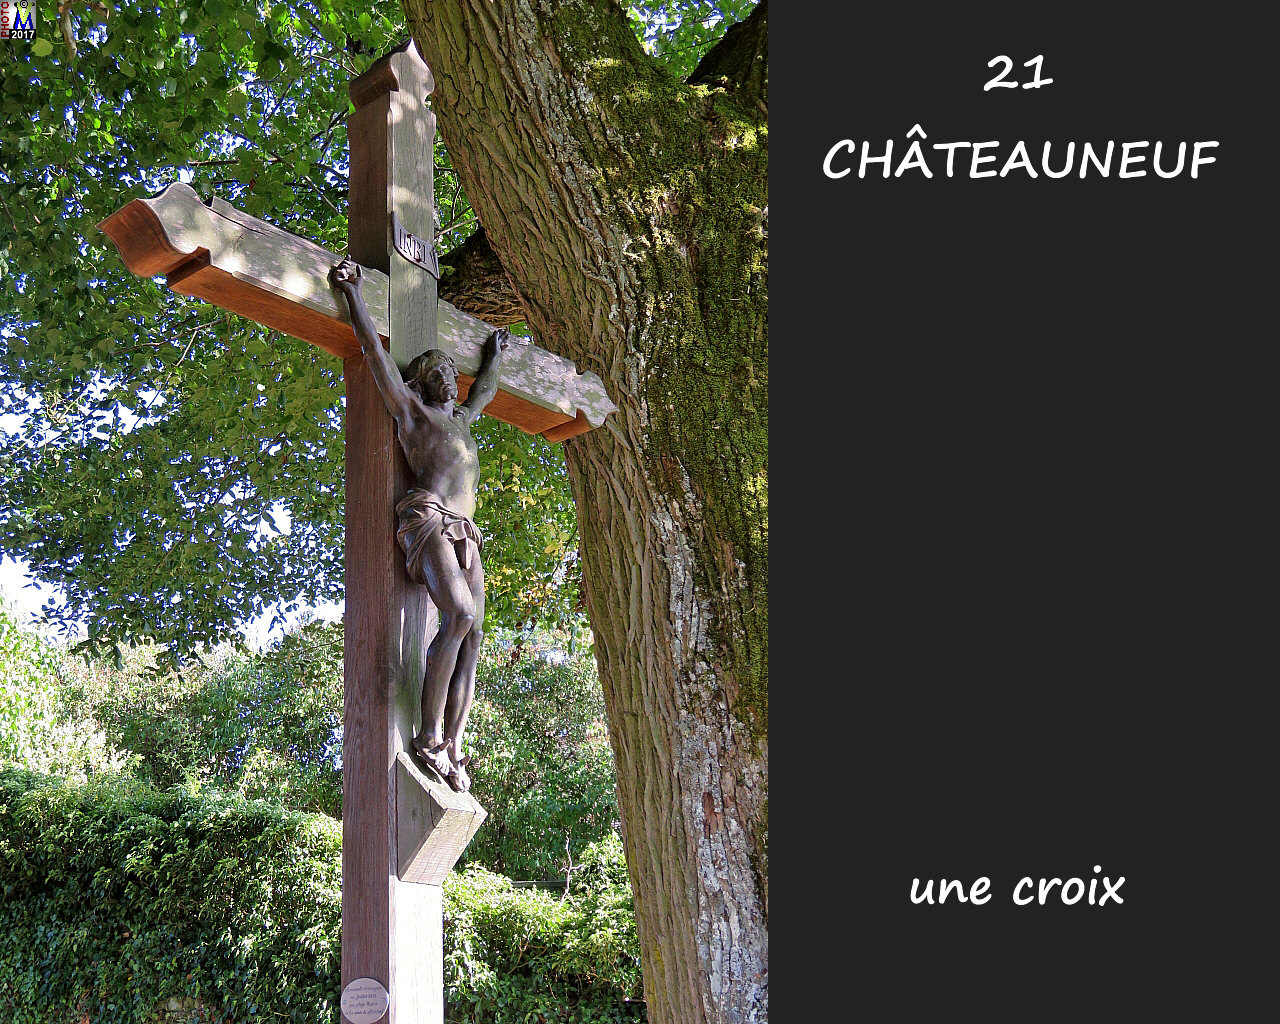 21CHATEAUNEUF_croix_122.jpg